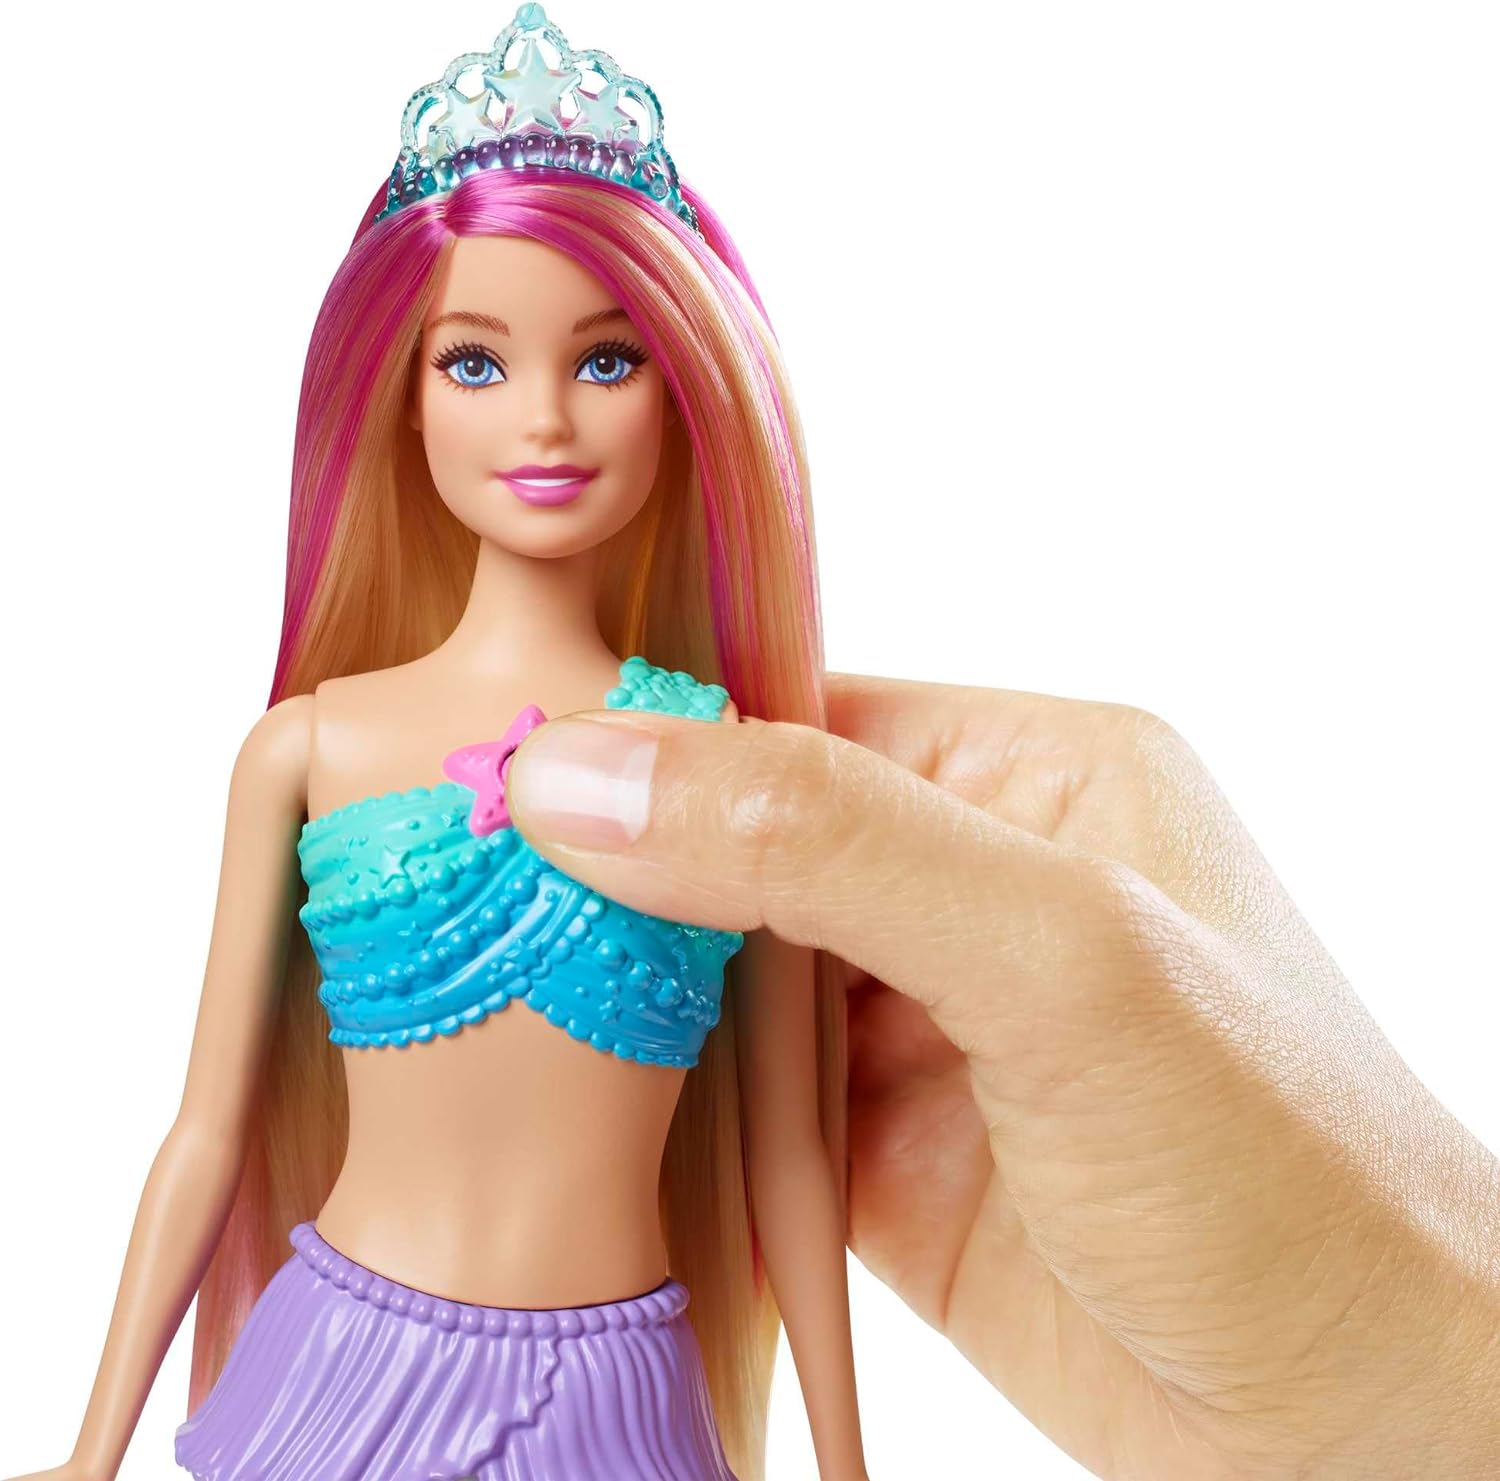 You are currently viewing Barbie Dreamtopia Doll Review